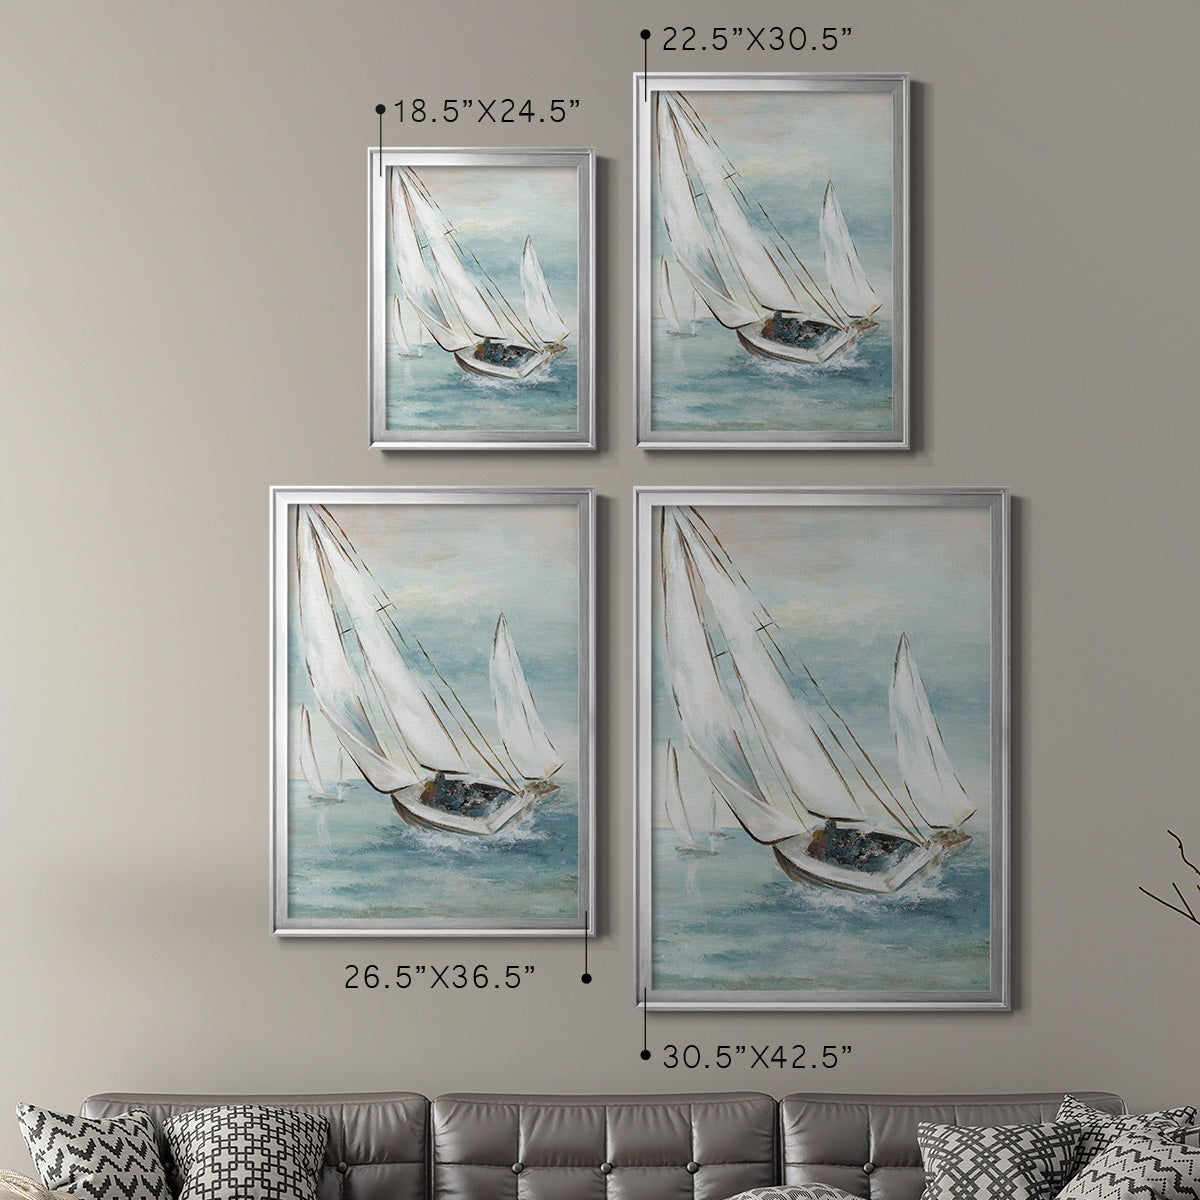 Catching Wind Premium Framed Print - Ready to Hang